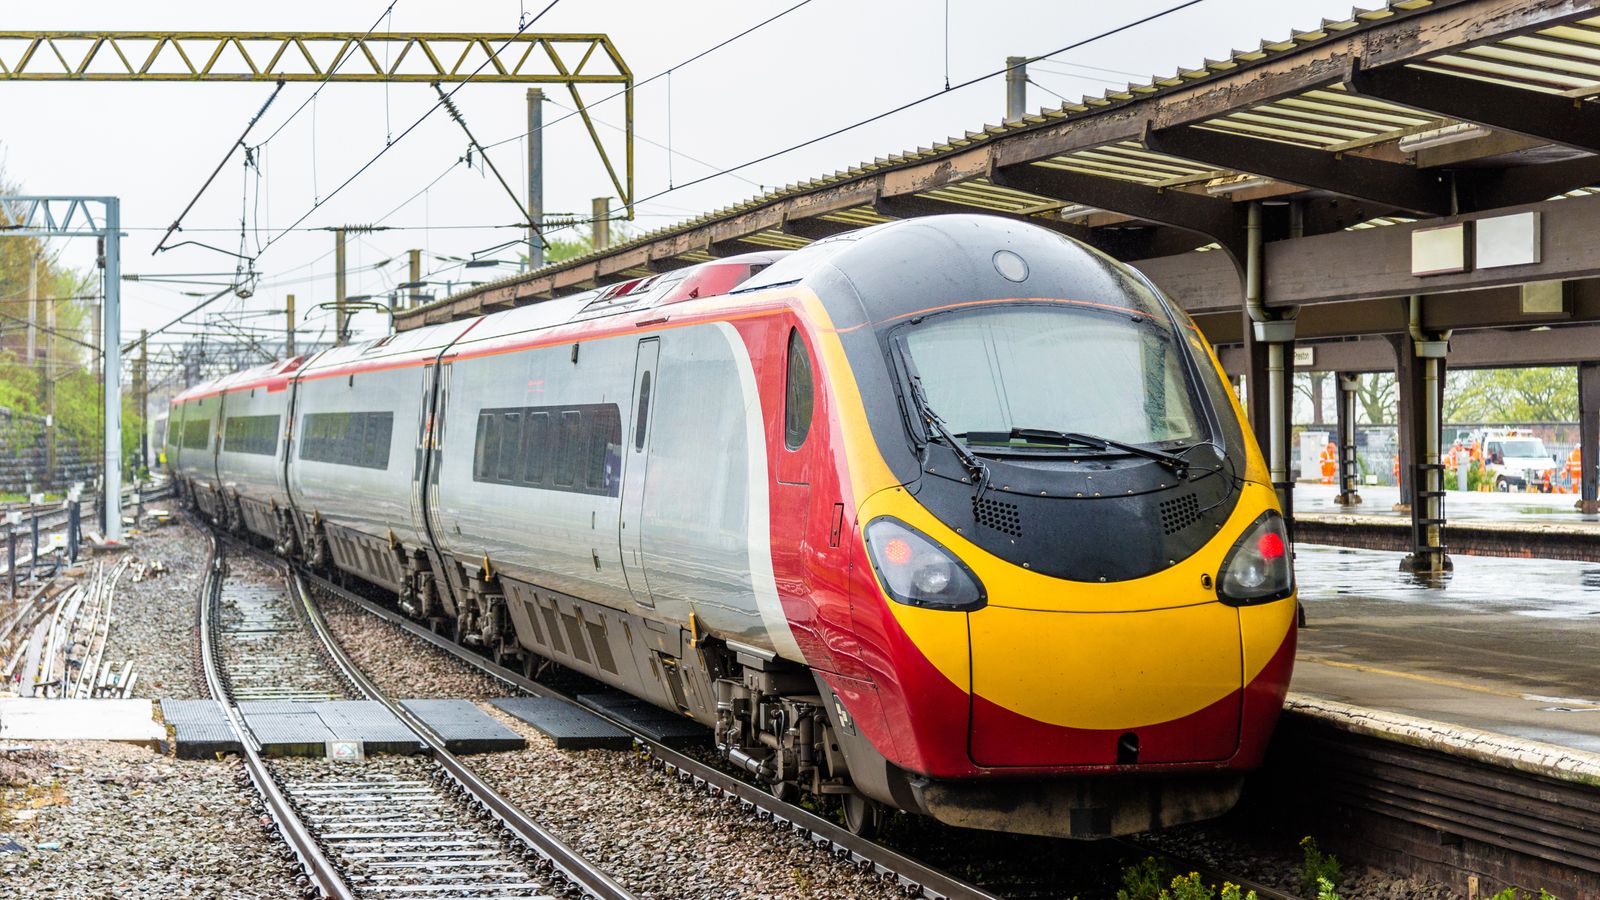 UK weather: Yellow warnings issued as heavy rain could cause travel disruption amid train strike